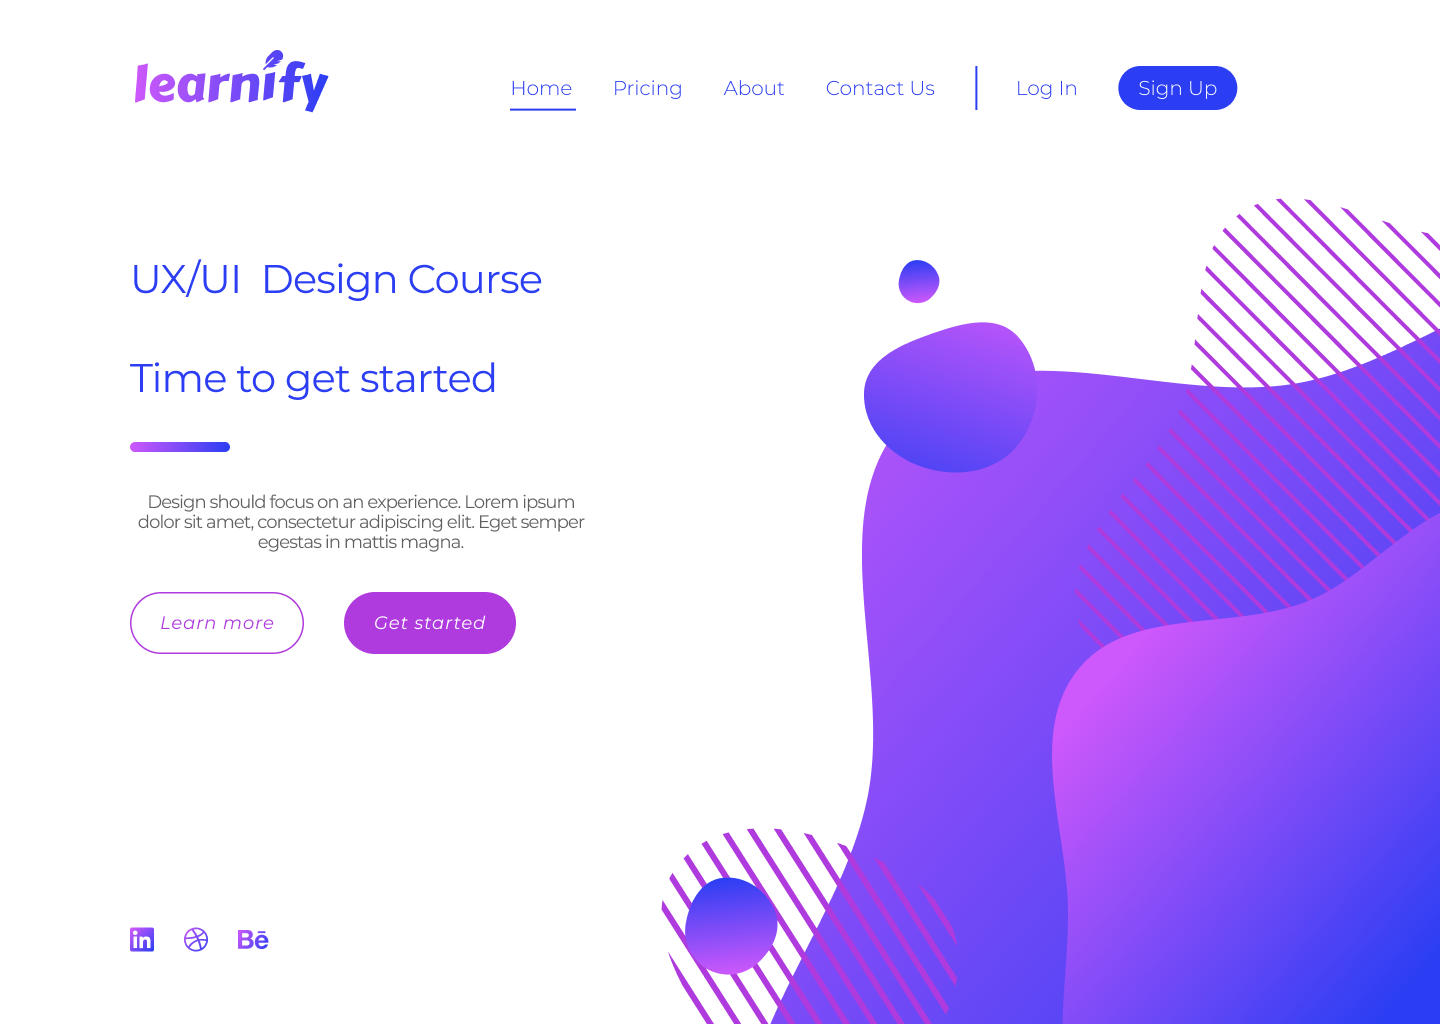 A website page for a fictional company called 'Learnify'. The text on the page is cluttered and there is no clear sense of flow when reading the material.